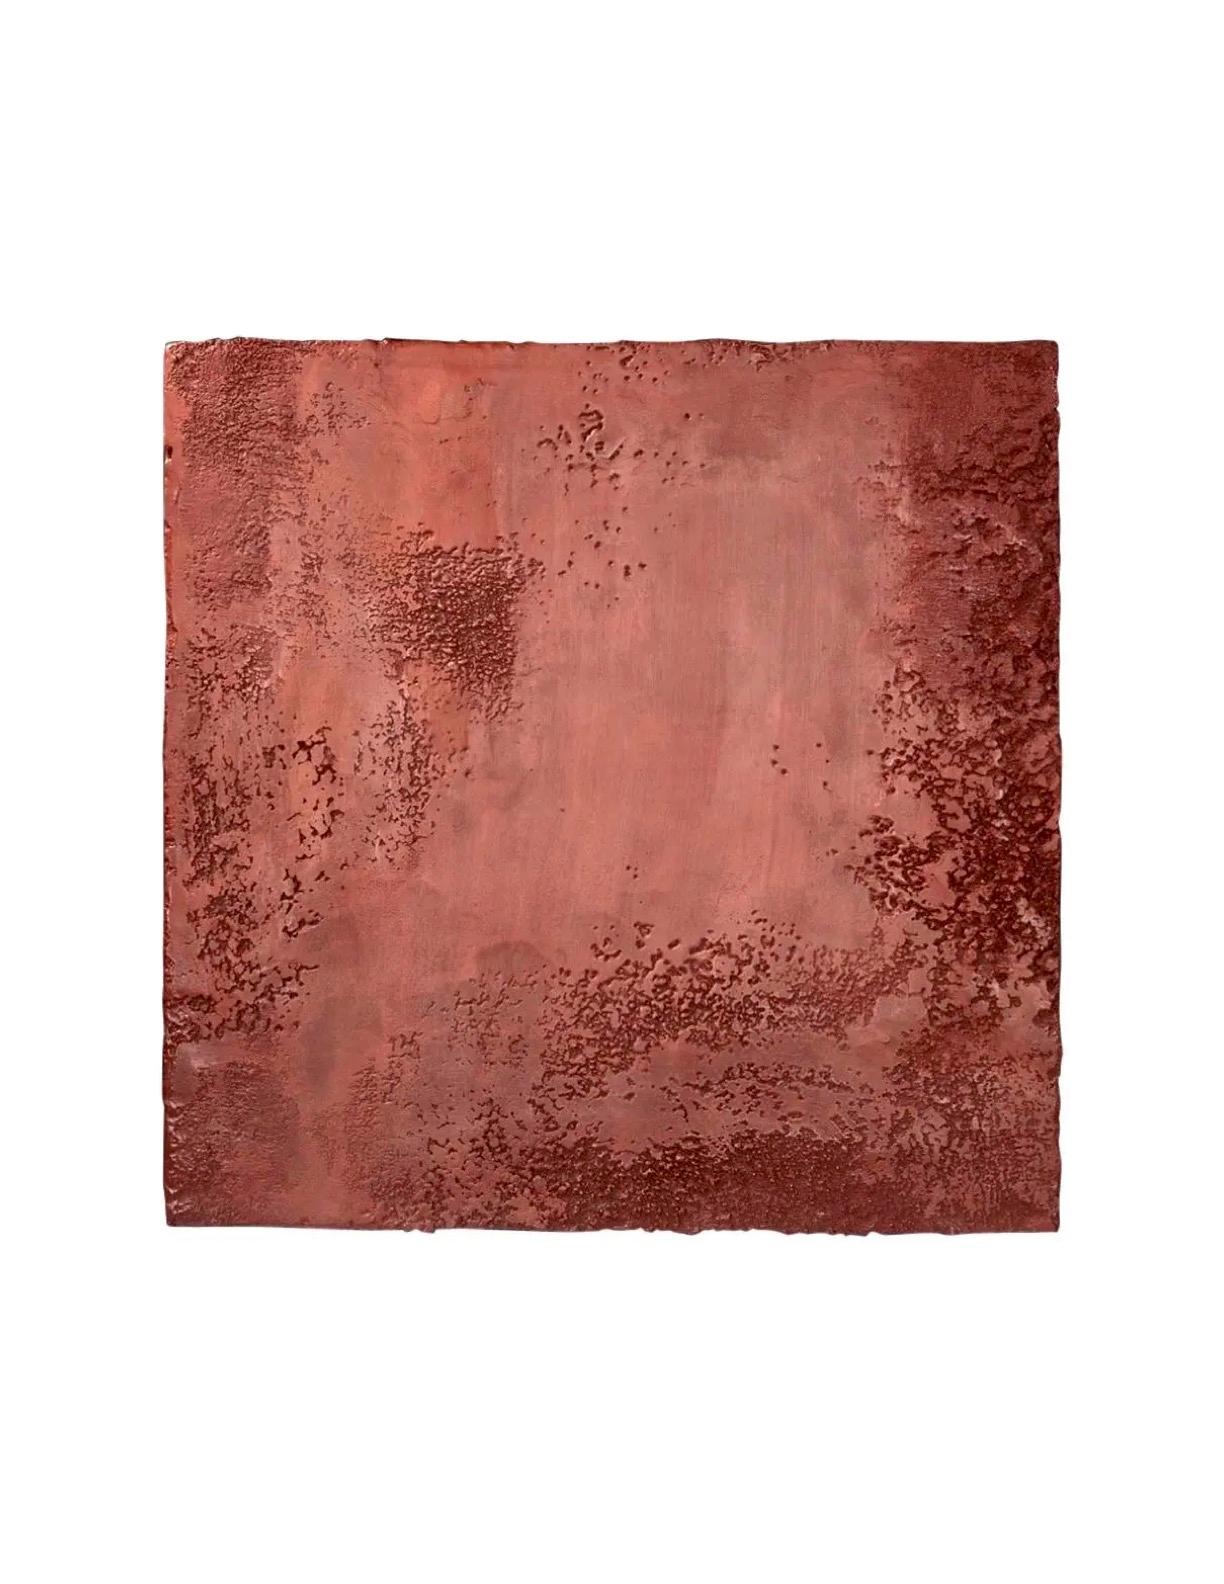 Modern Richard Hirsch Encaustic Painting of Nothing #13M, 2011 For Sale